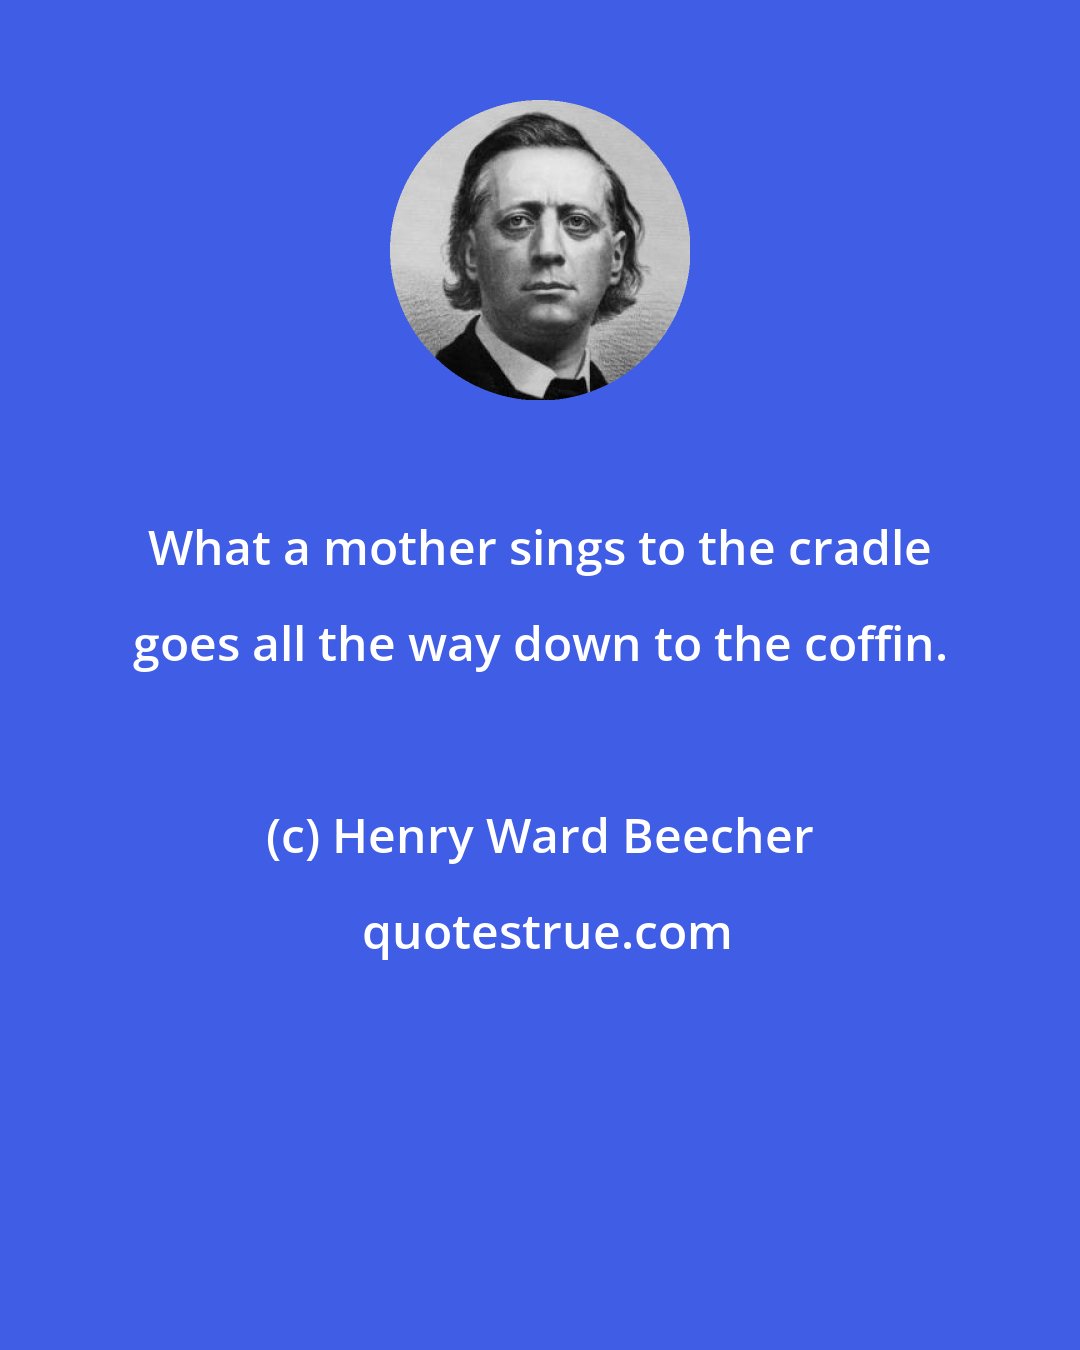 Henry Ward Beecher: What a mother sings to the cradle goes all the way down to the coffin.